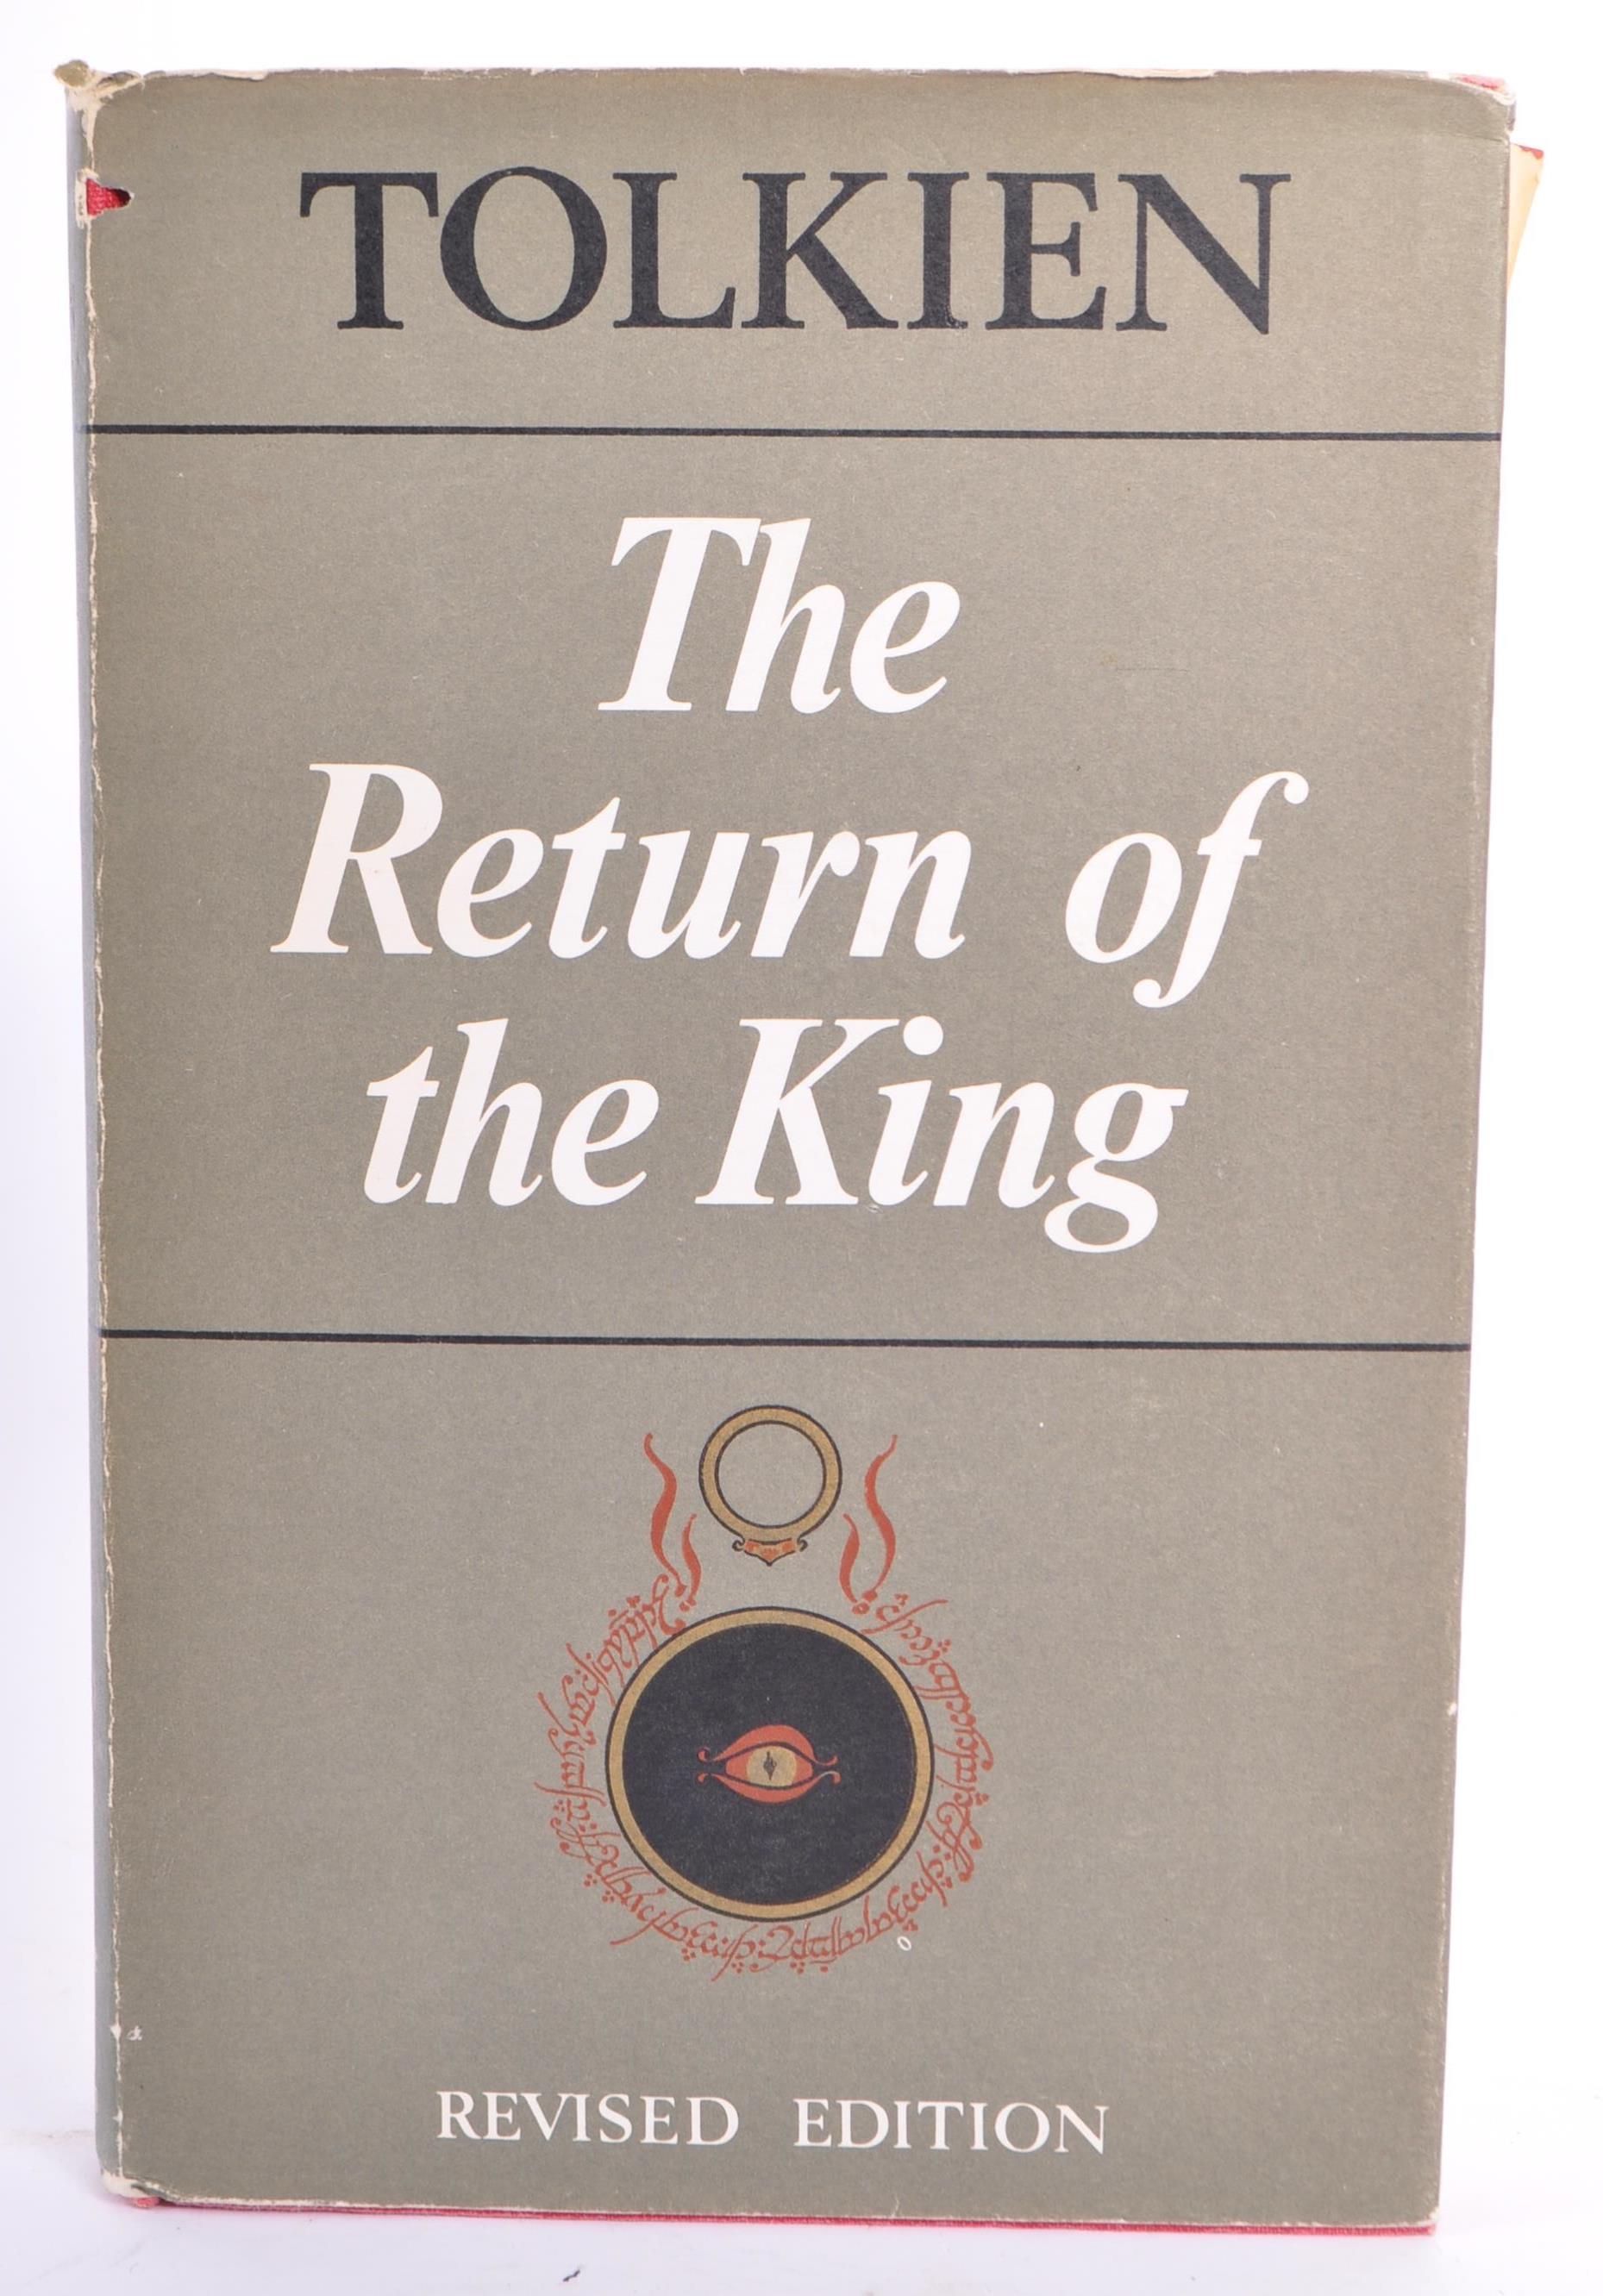 J. R. R. TOLKIEN - LORD OF THE RINGS - THREE 1960S HARDBACK BOOKS - Image 6 of 16